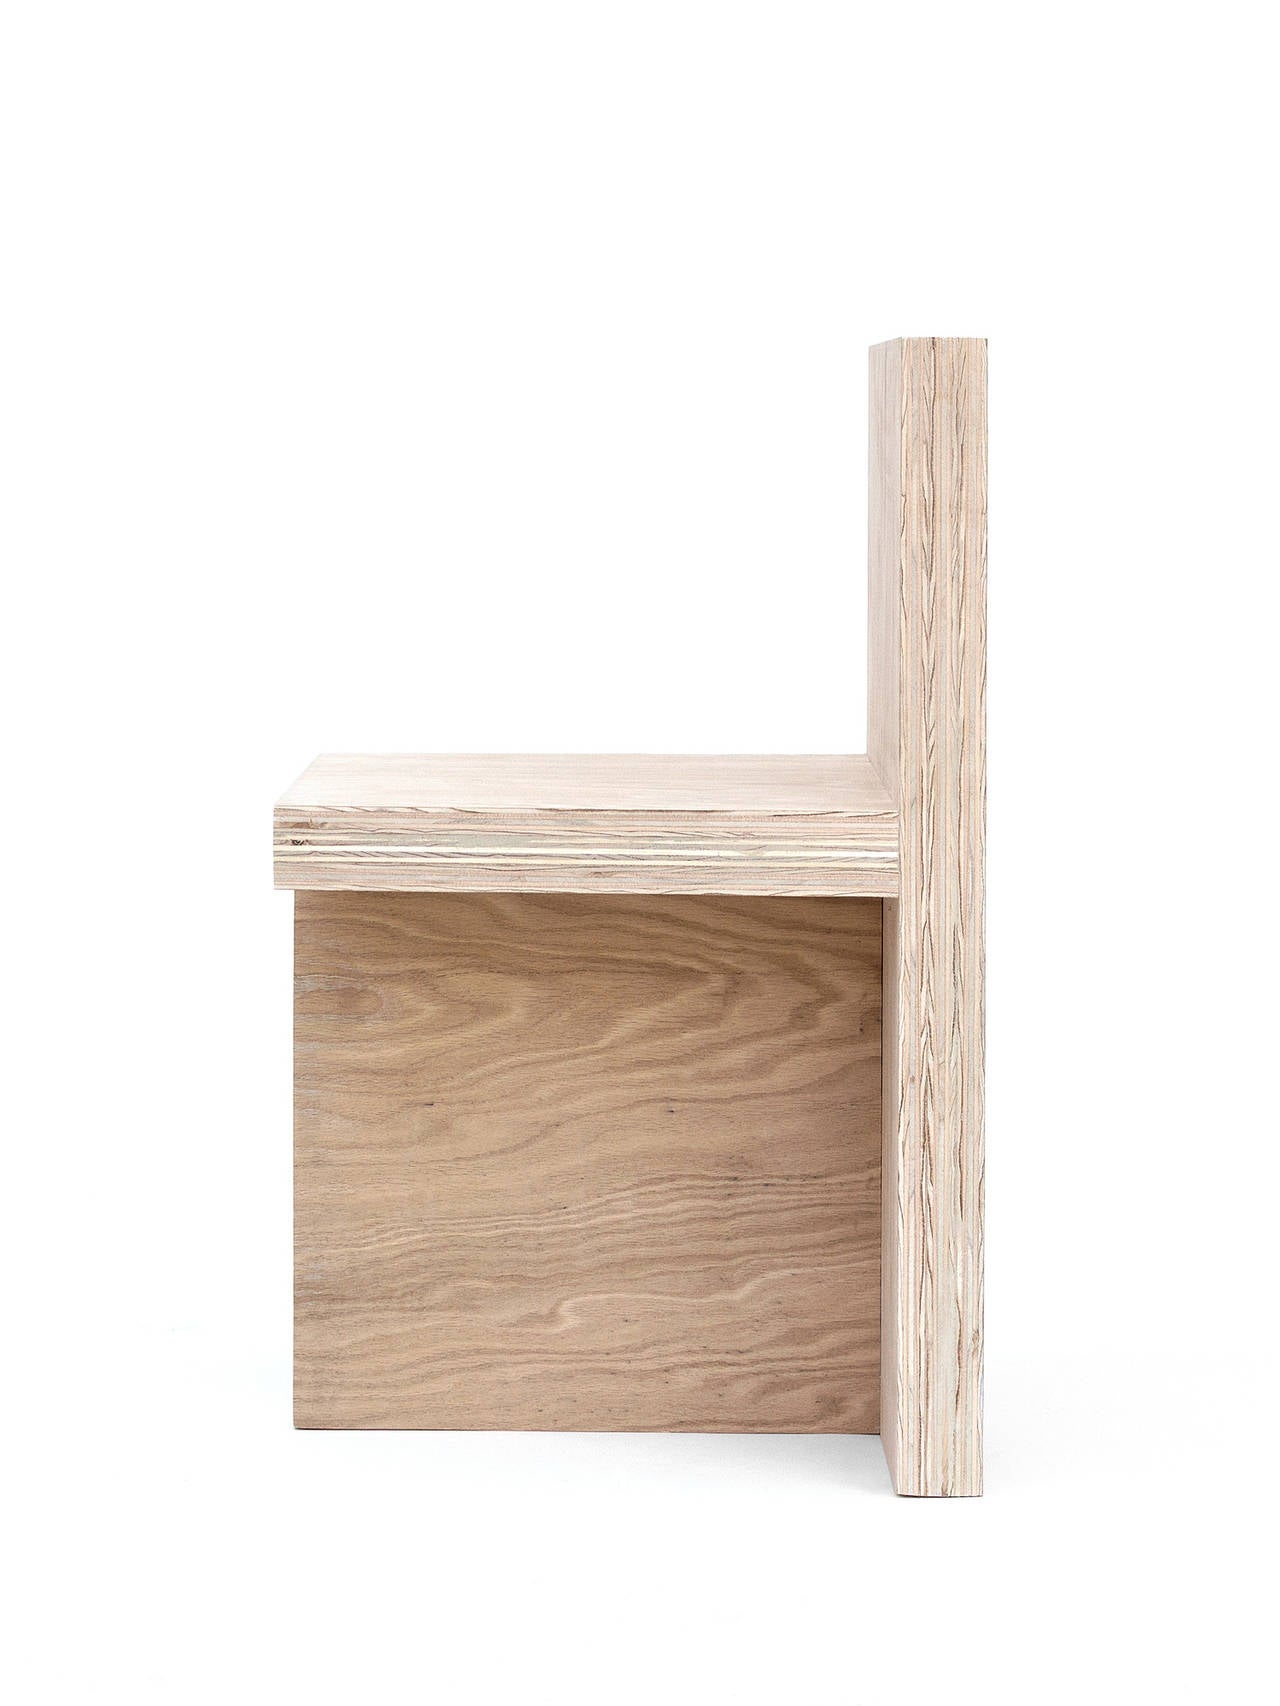 American 'Monument IV' Natural Plywood Chair by Lukas Machnik For Sale